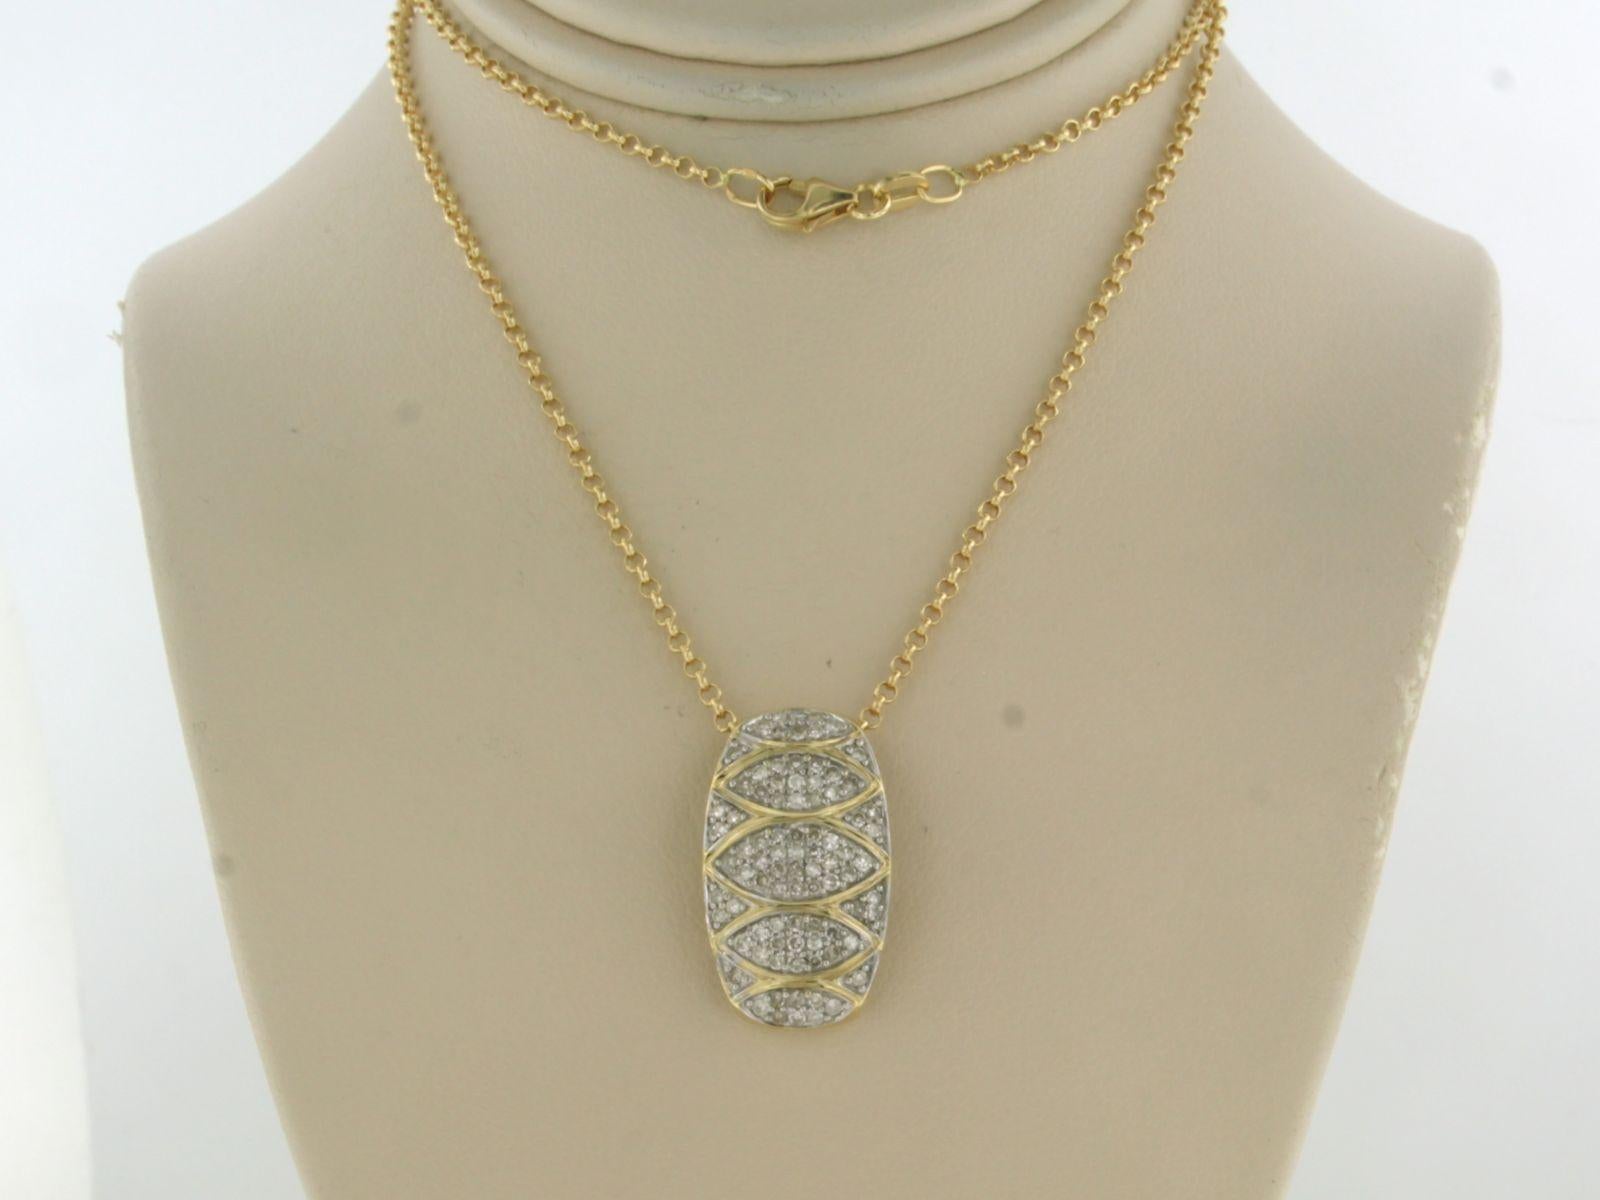 18k yellow gold necklace and a bicolour gold pendant with single cut diamonds. 0.50ct - F/G - VS/SI - 42 cm long

Detailed description

The necklace is 42 cm long and 1.4 mm wide

Dimensions of the pendant are 2.0 cm long by 1.2 cm wide

weight: 6.2